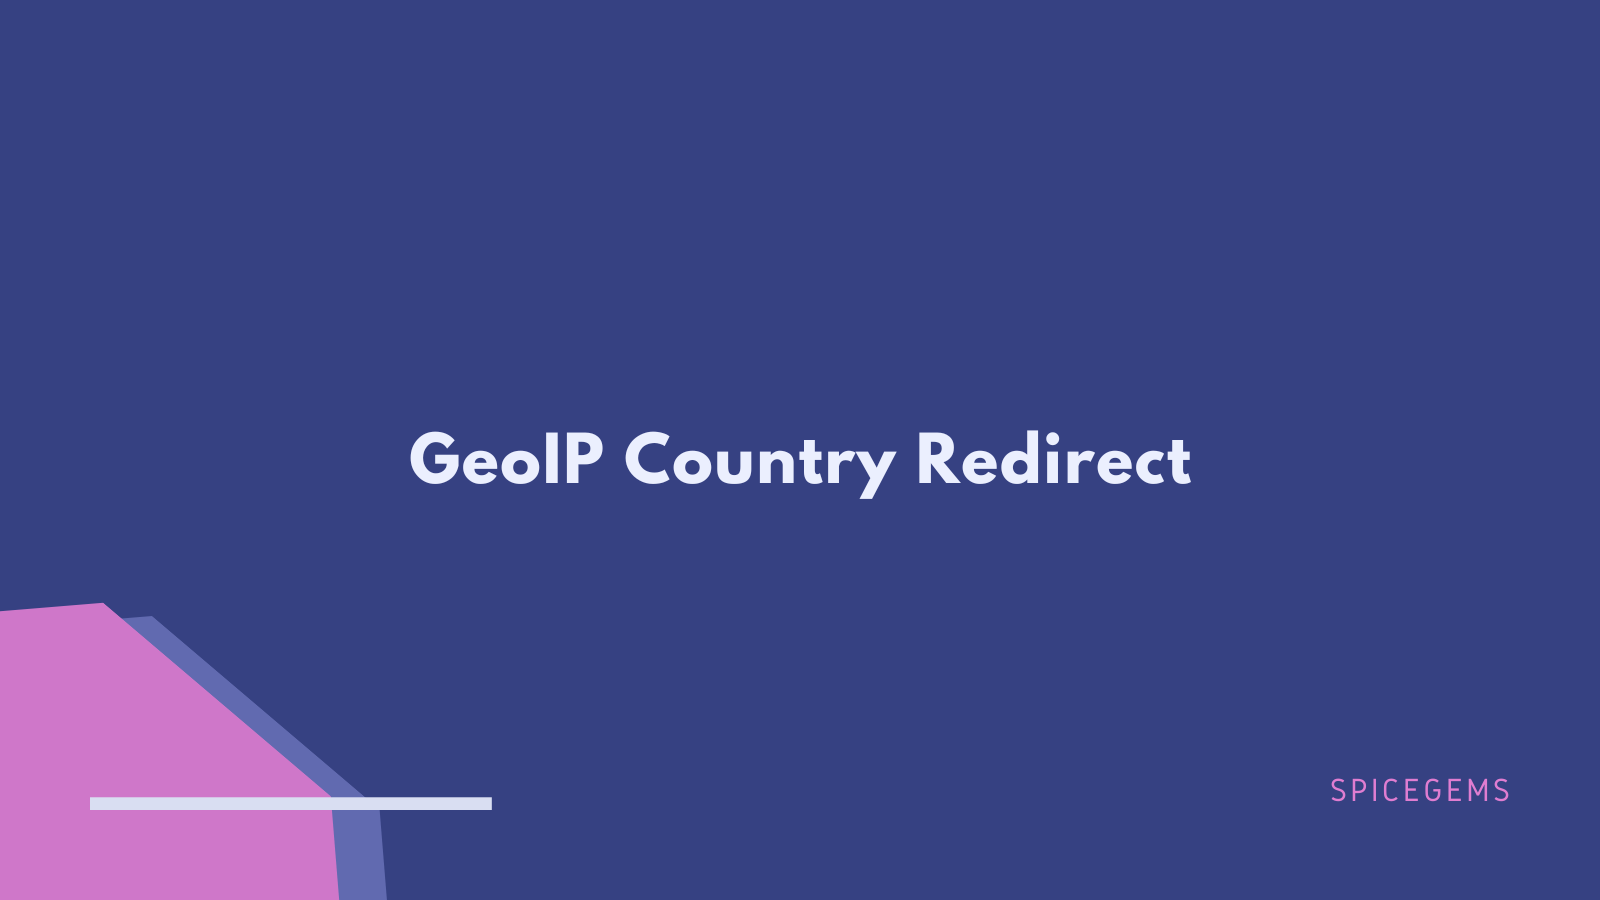 GeoIP Country Redirect